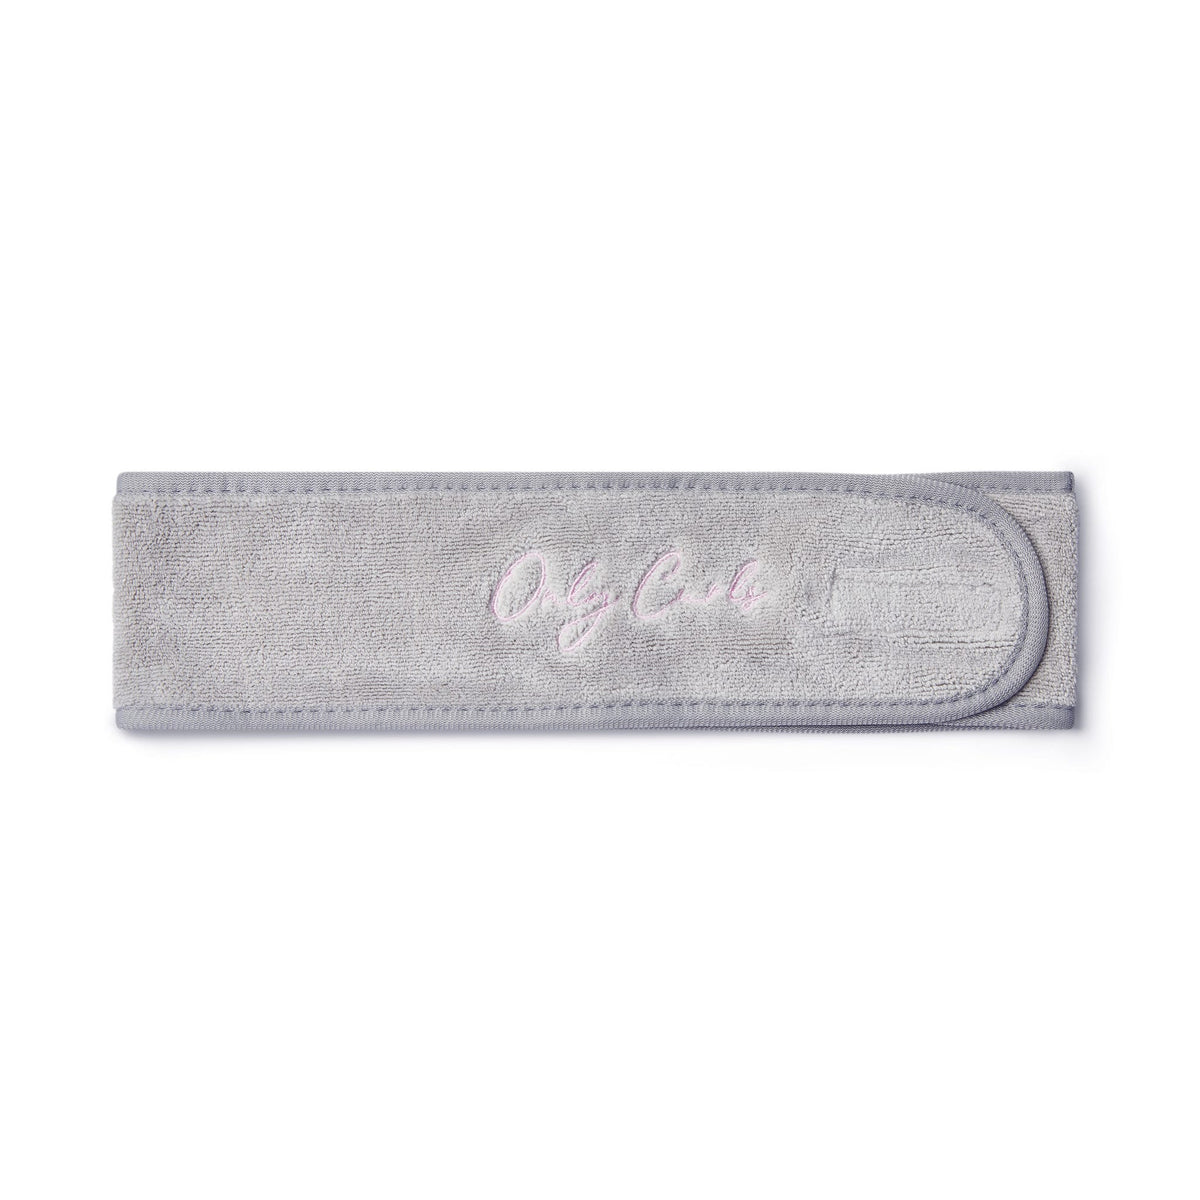 Only Curls Microfibre Headband - Silver - Only Curls